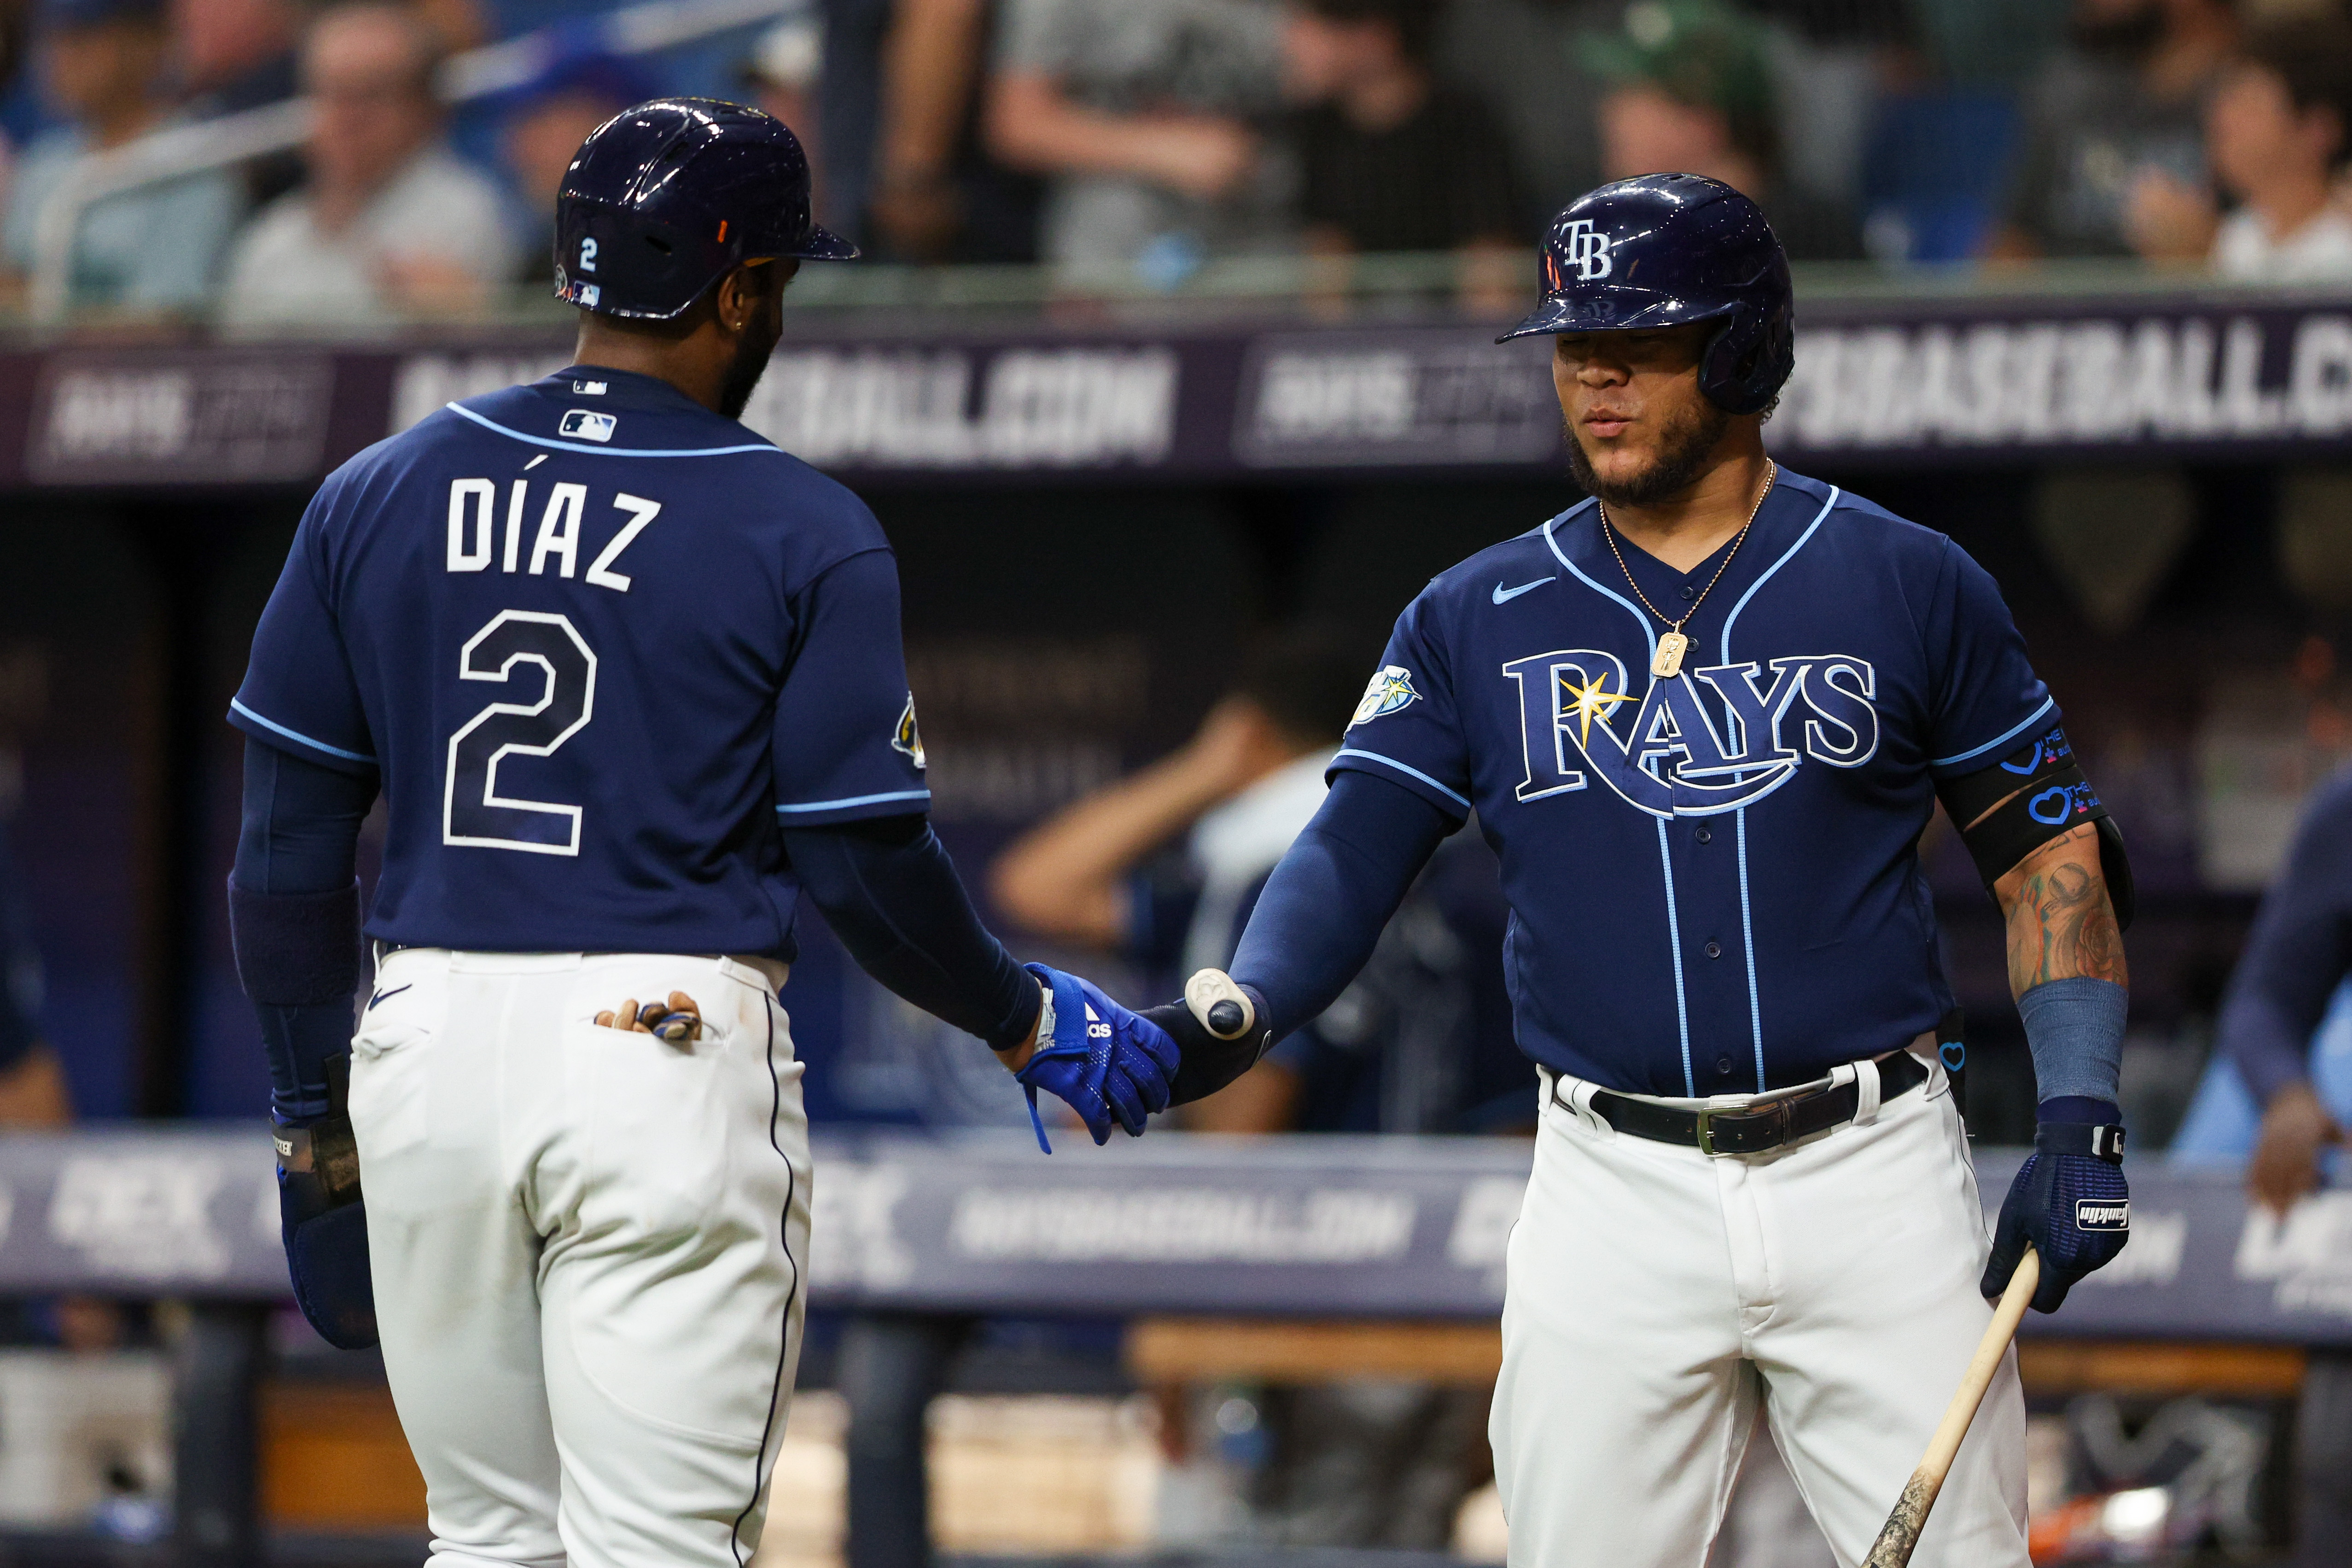 Rays improve to 14-0 at home with win over Astros